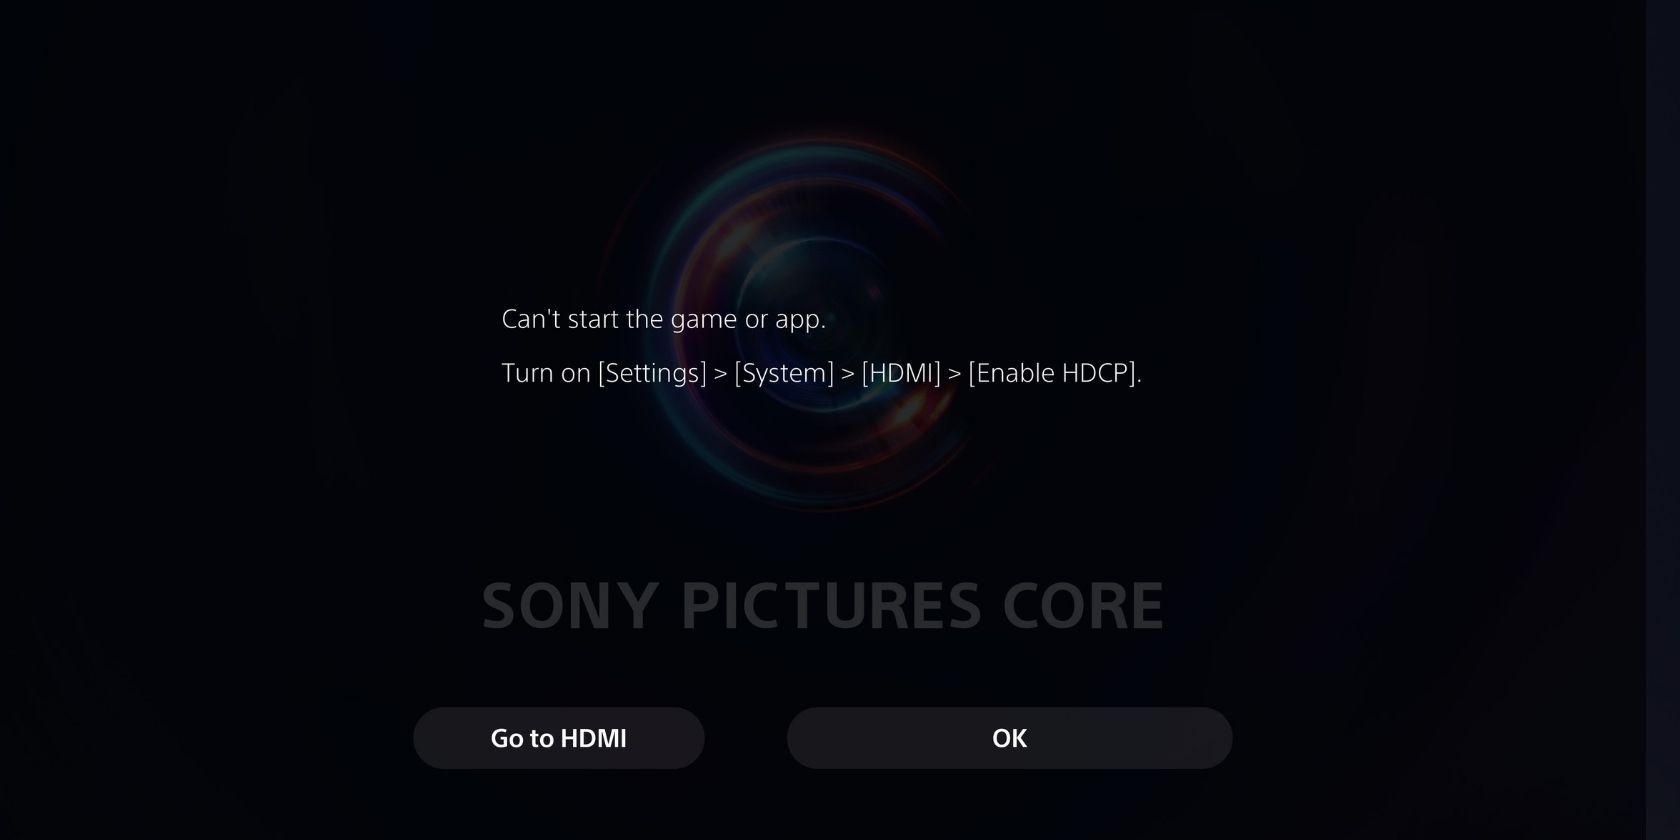 Go to HDMI option on Sony Pictures Core PS5